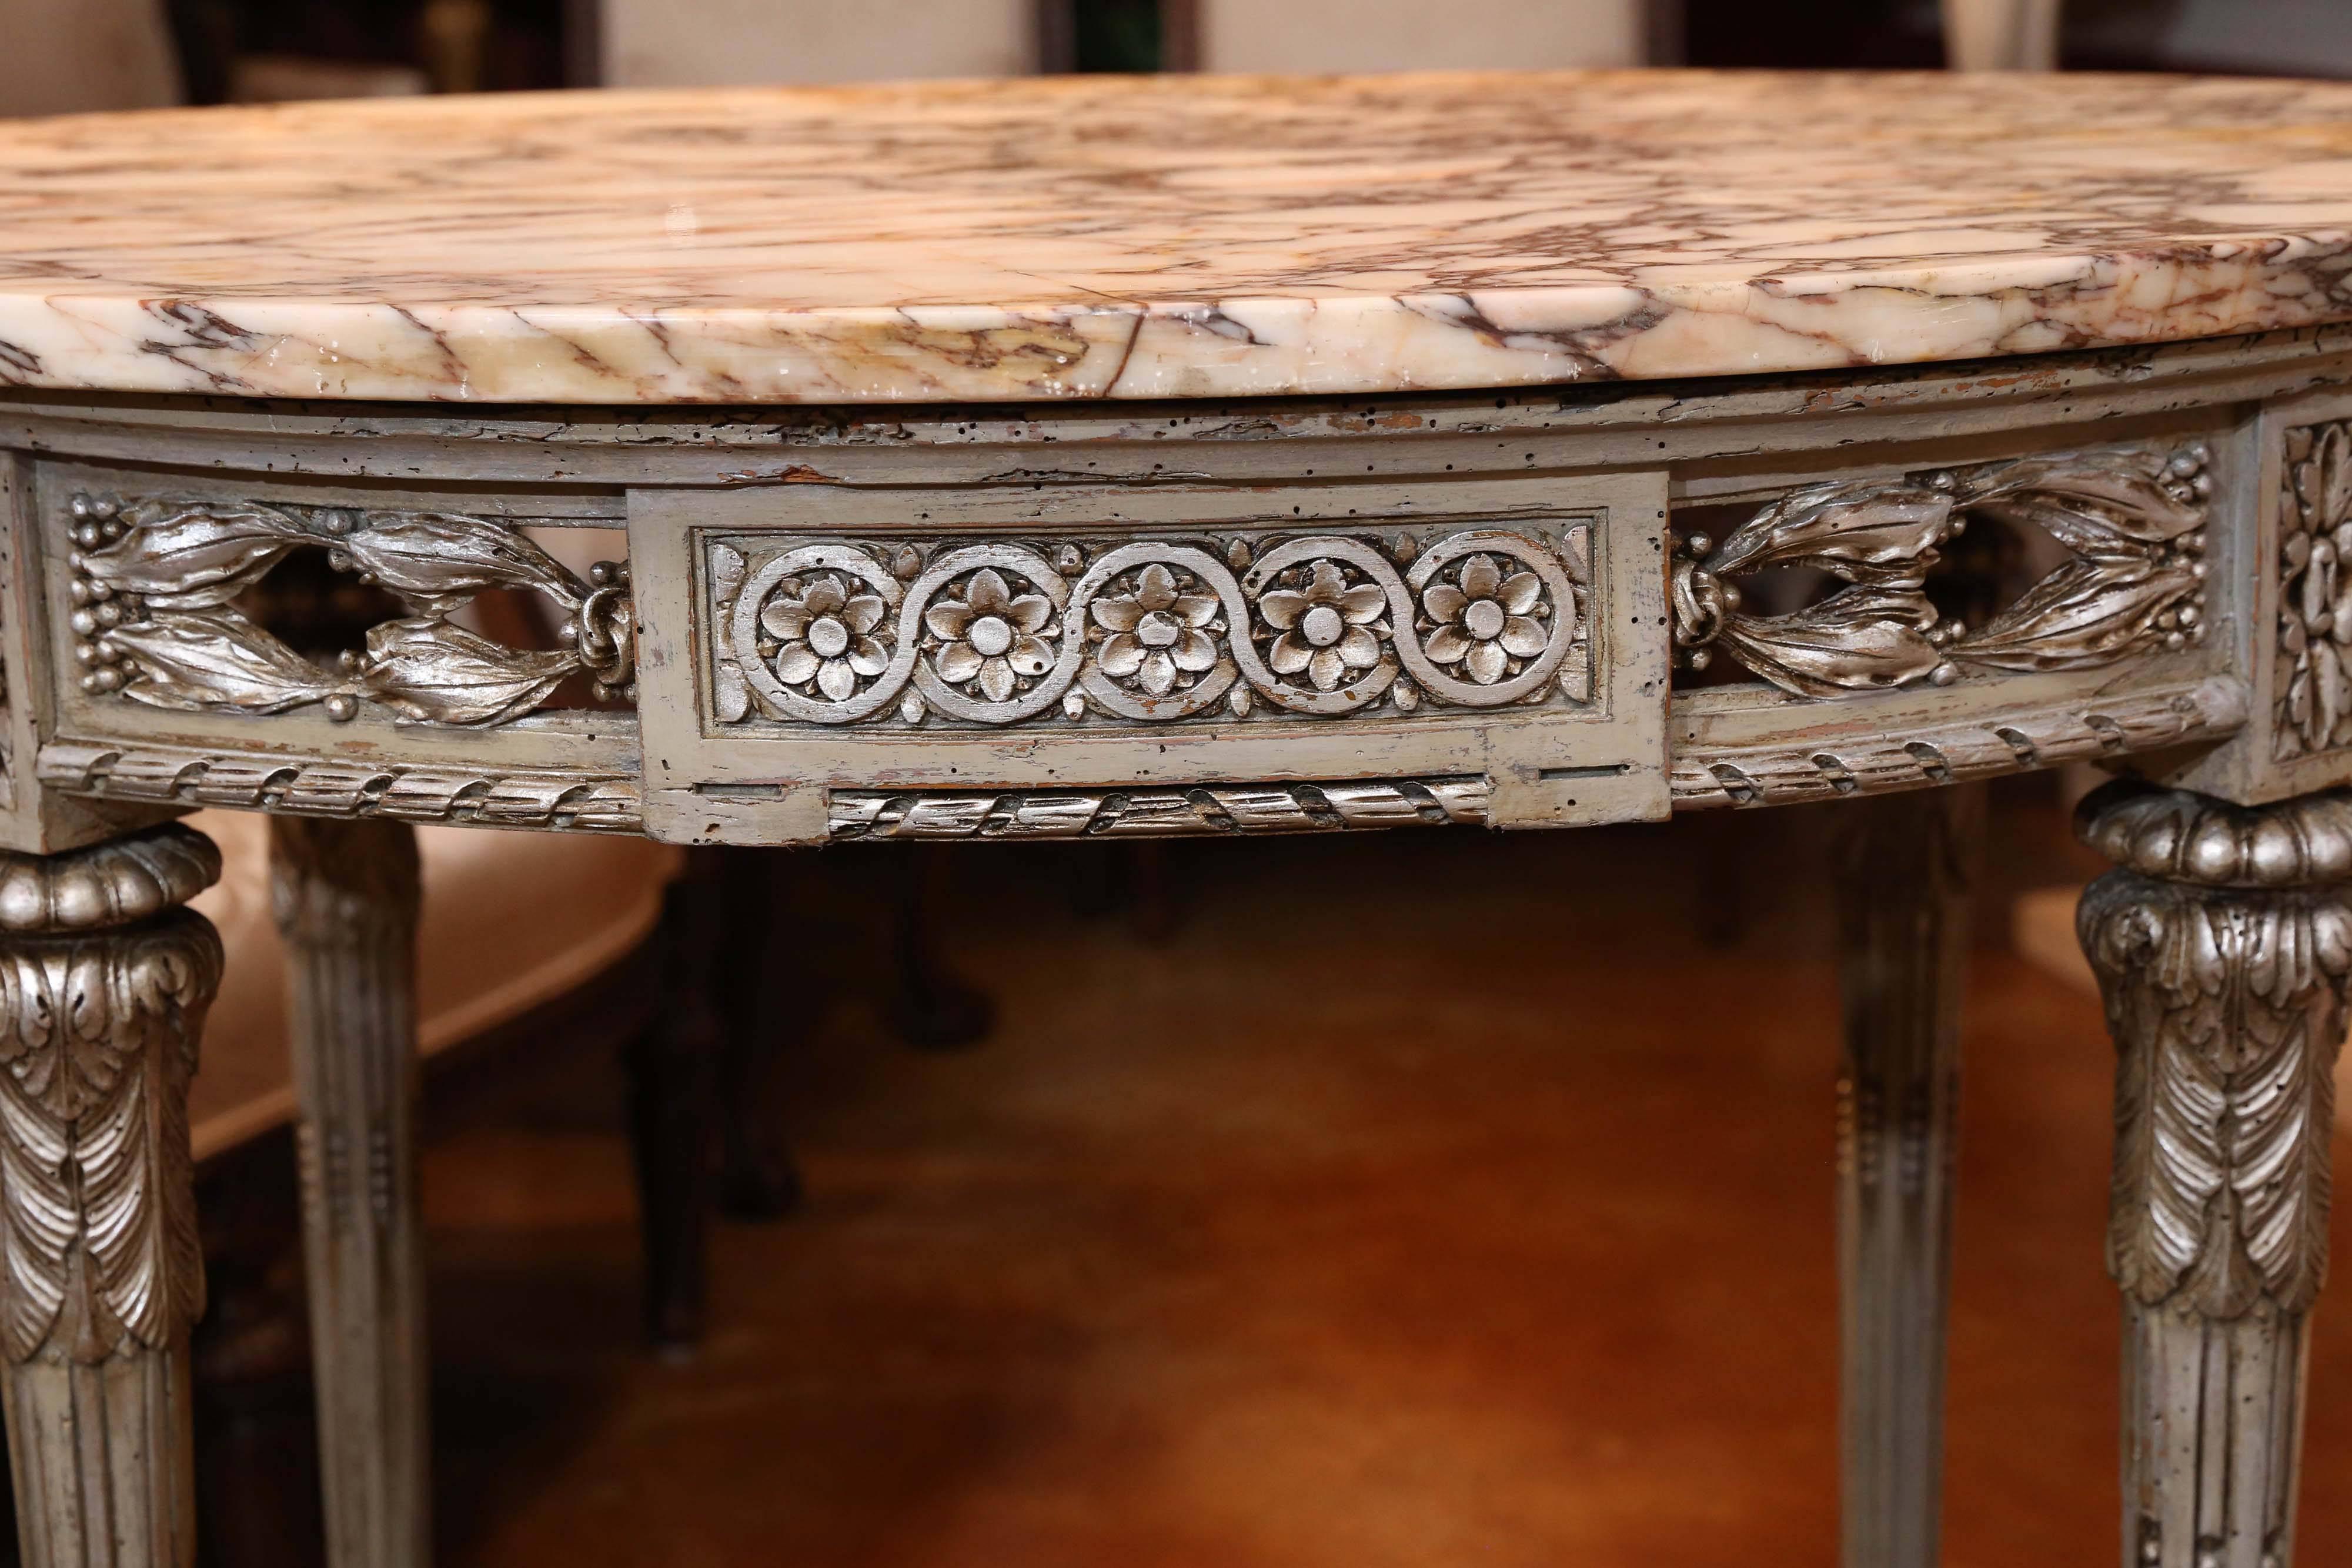 Wood 19th Century French Center Table, Painted in Gray Green/Silver Accents